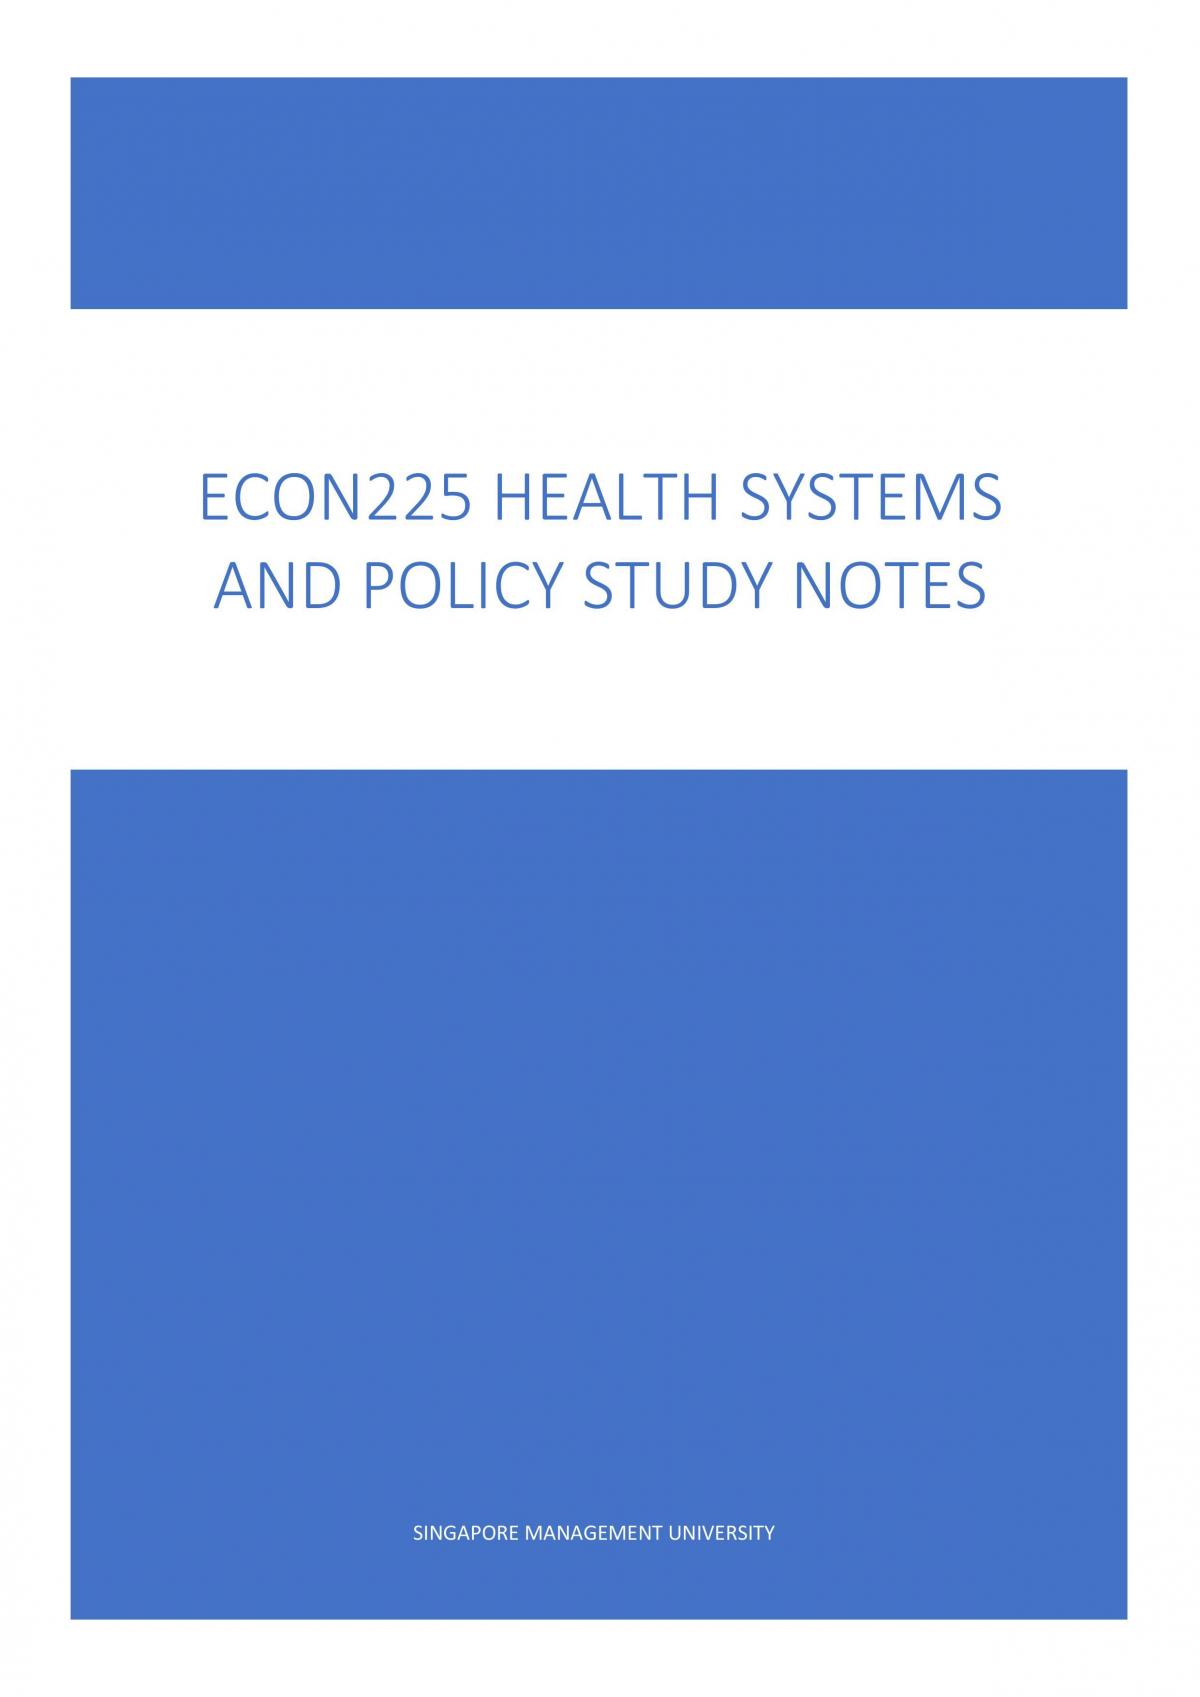 ECON225 Health Systems Study Notes - Page 1